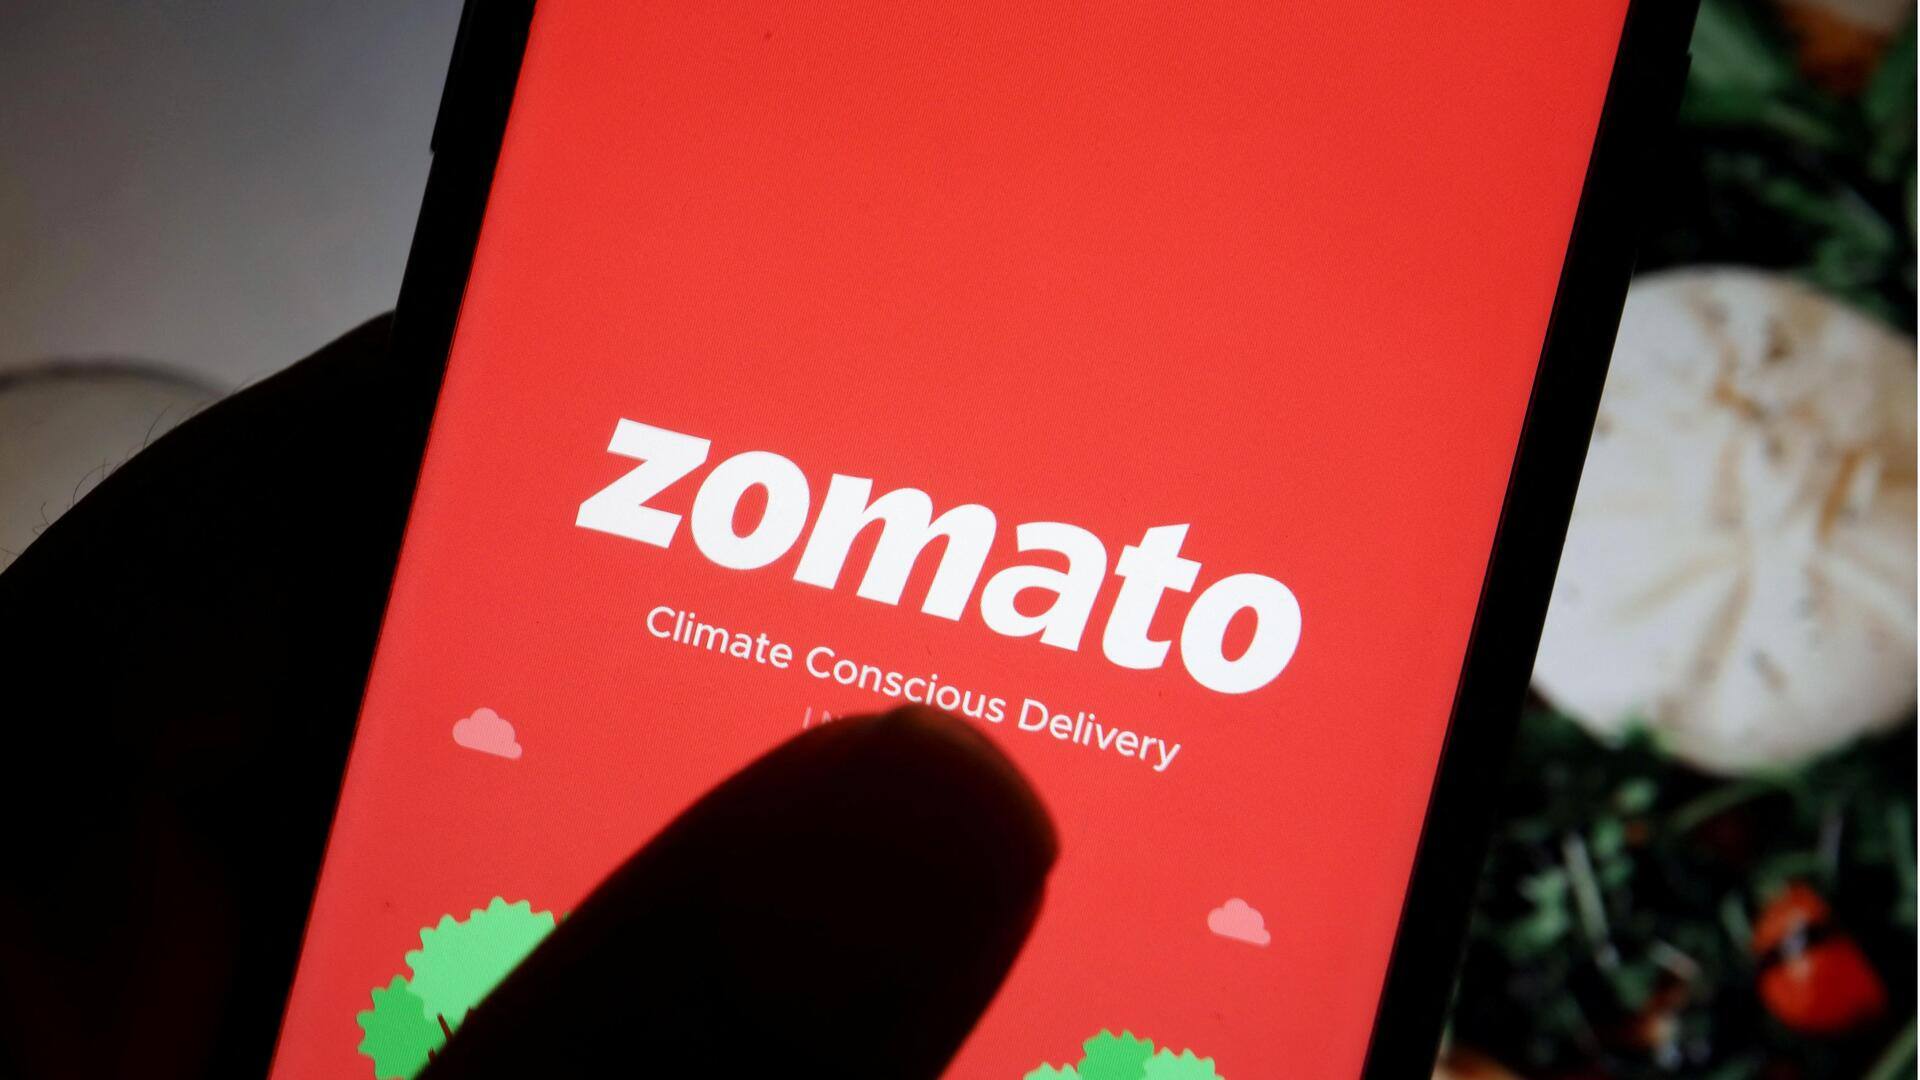 Zomato makes offer to acquire Shiprocket